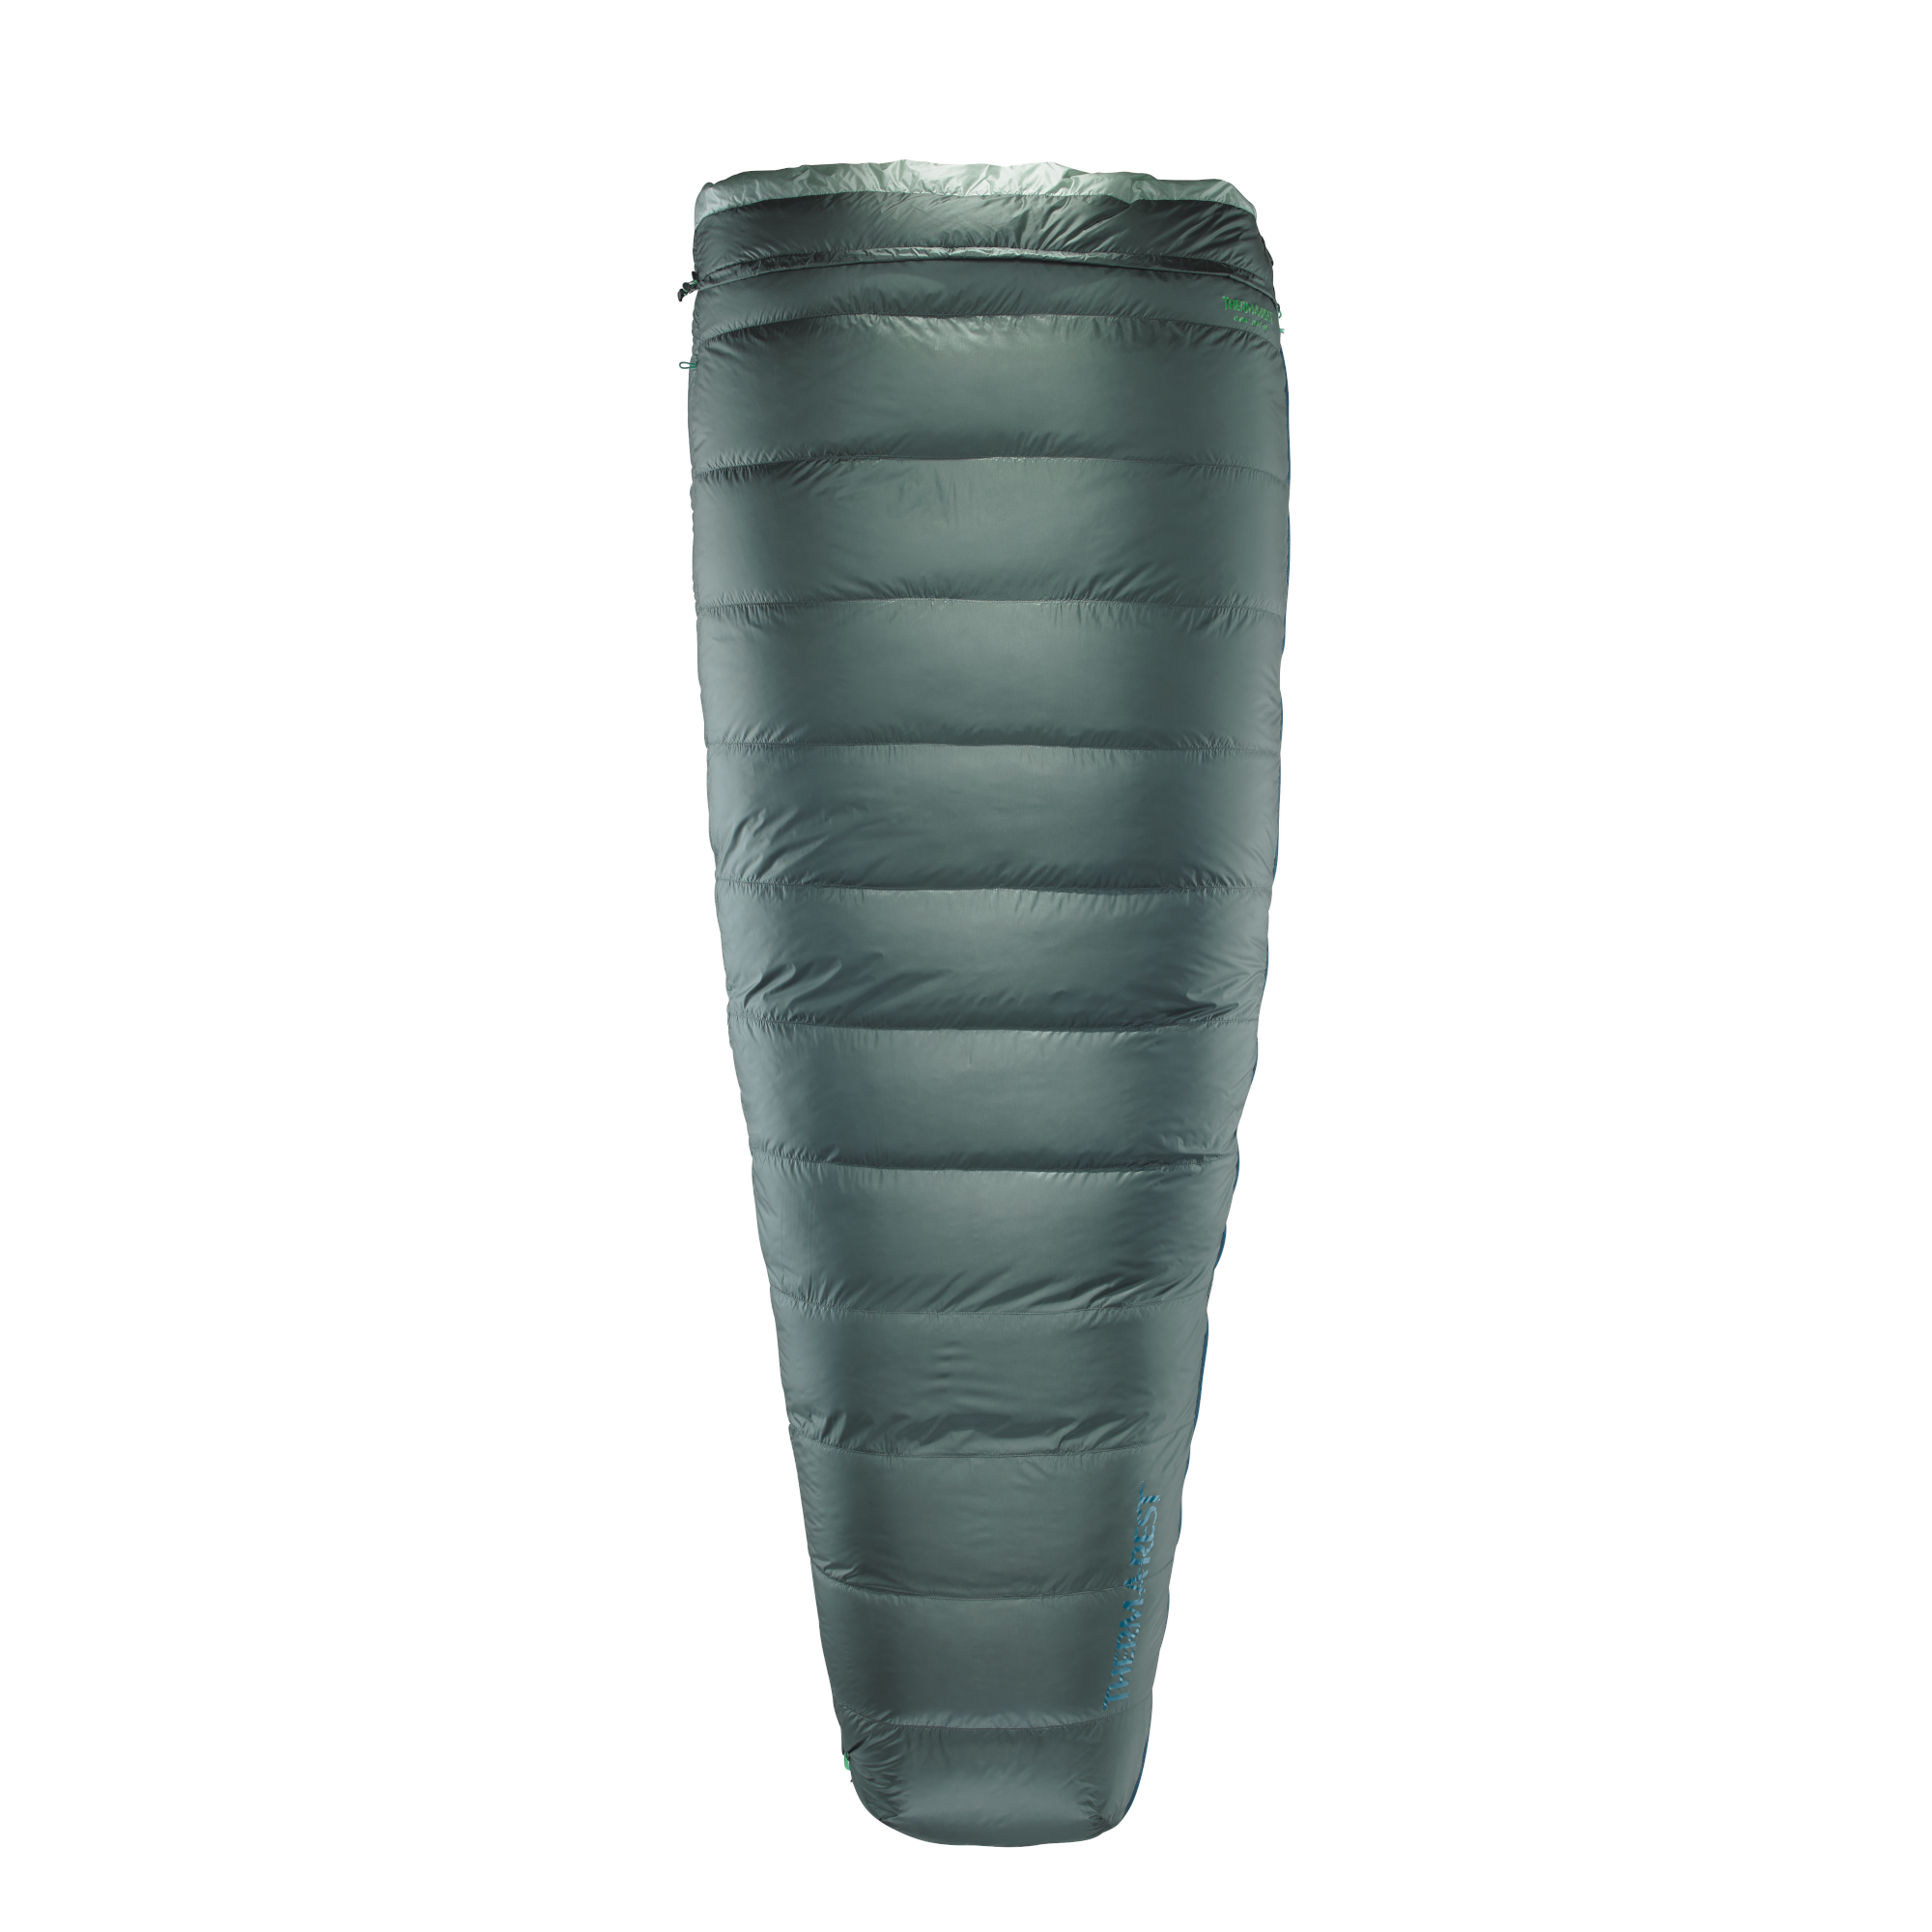 Thermarest Ohm 20F/-6C sleeping bag in Balsam colour showing open zip